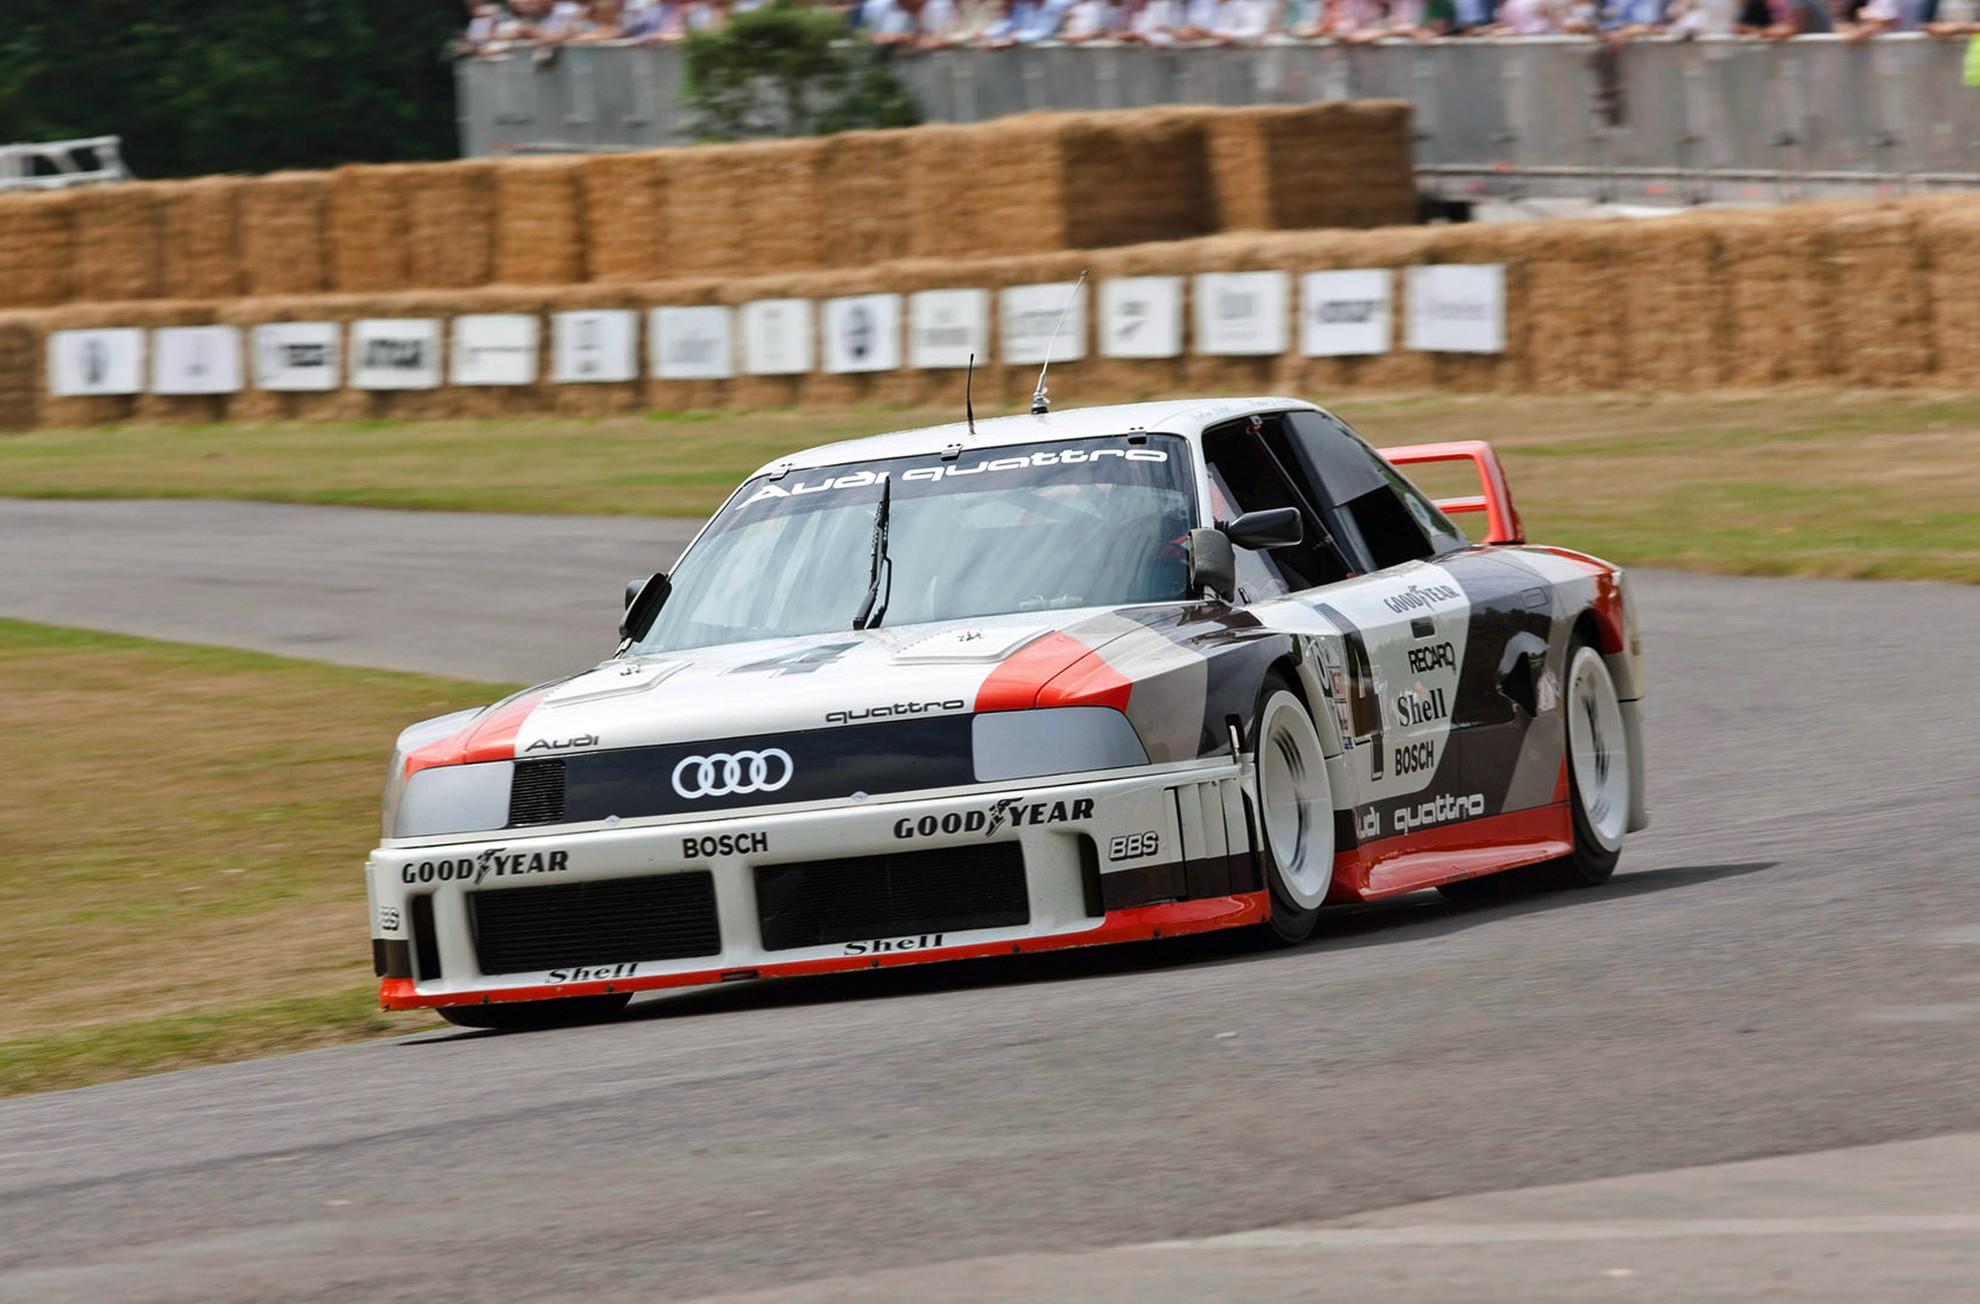 Audi at the Goodwood Festival of Speed